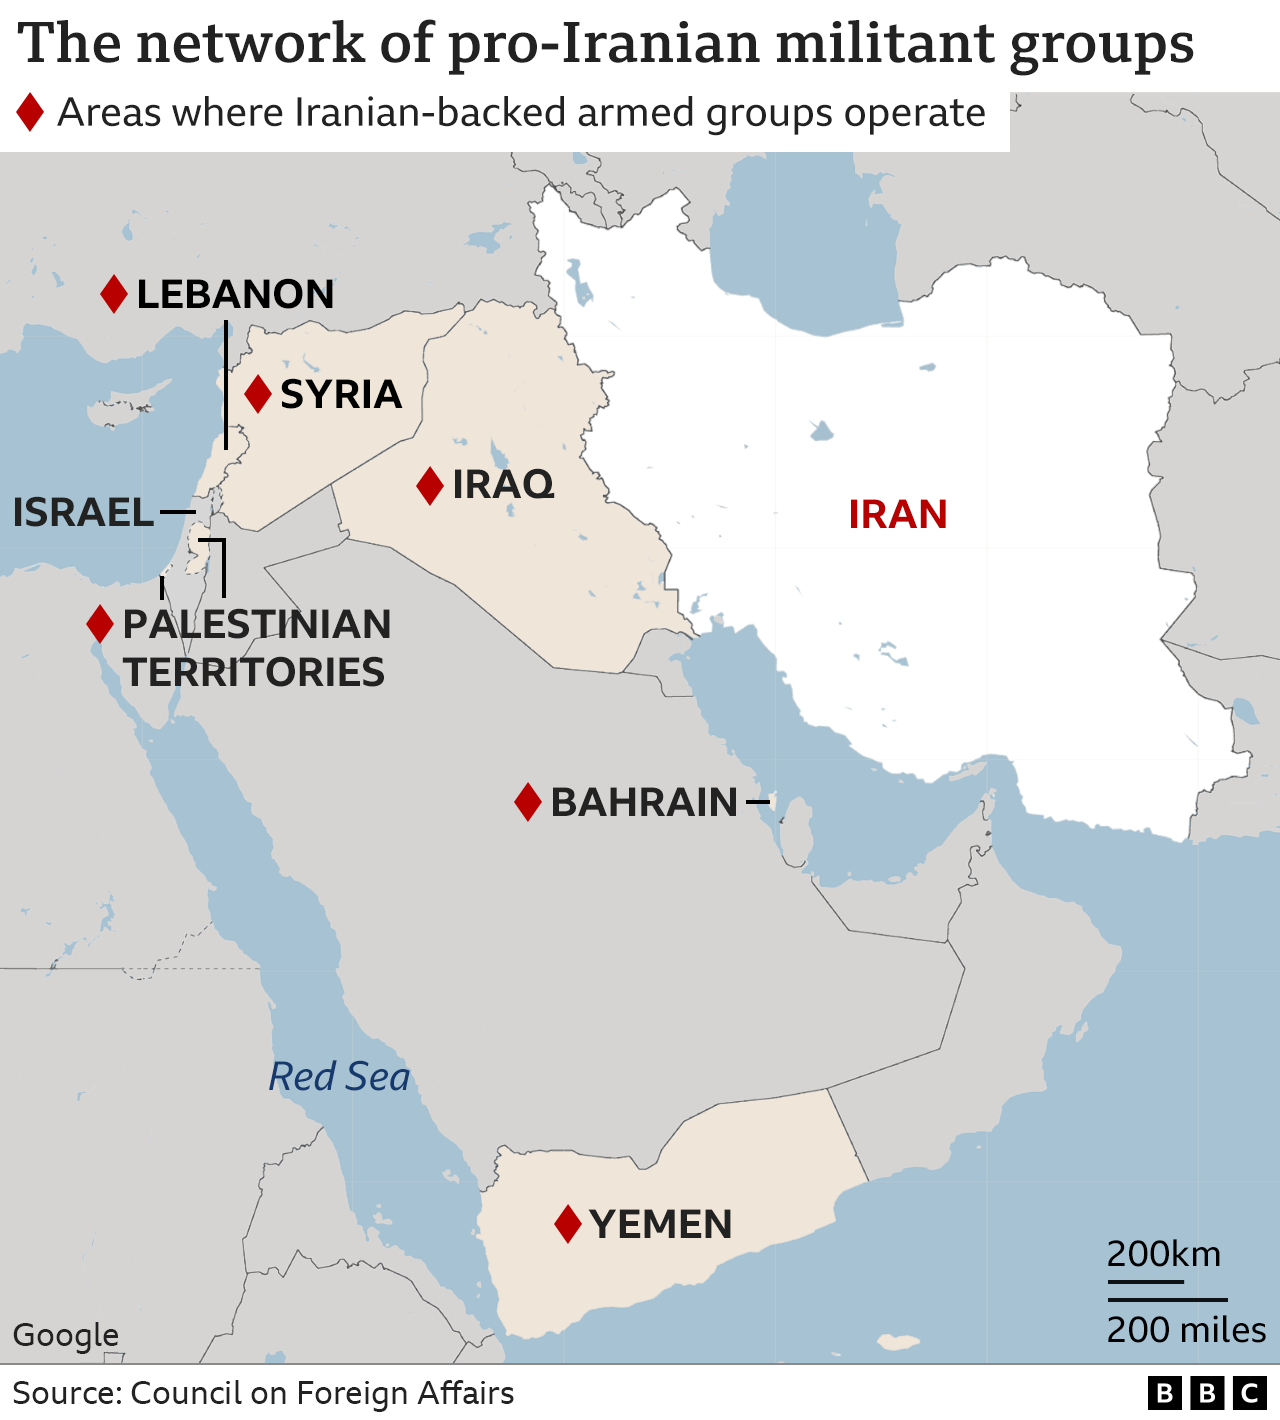 A map showing where pro-Iranian militant groups operate: Iraq, Syria, Lebanon, the Palestinian territories, Bahrain and Yemen.